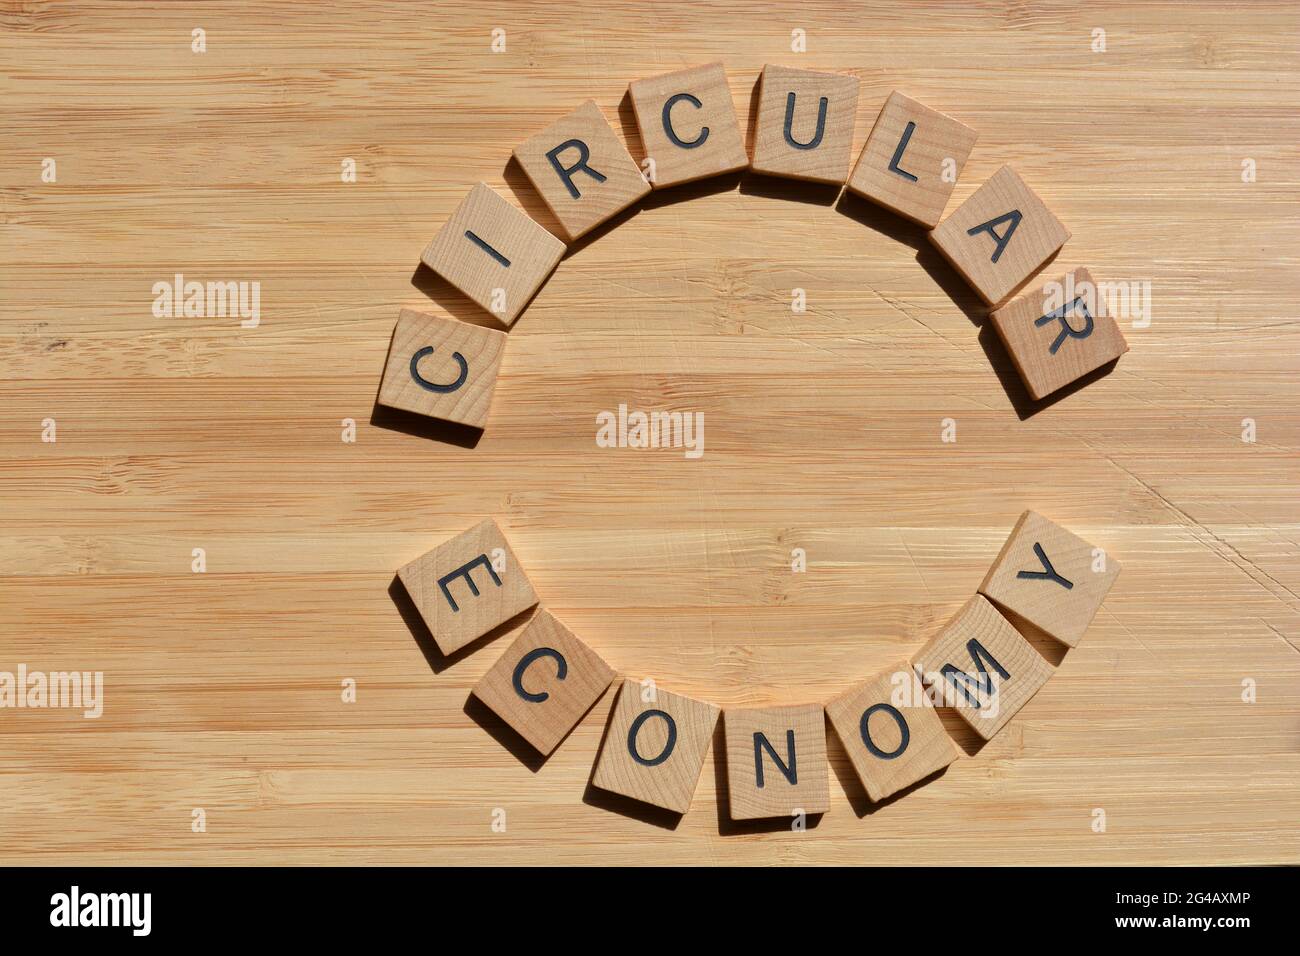 Circular Economy, words in wooden alphabet letters in a circle Stock Photo